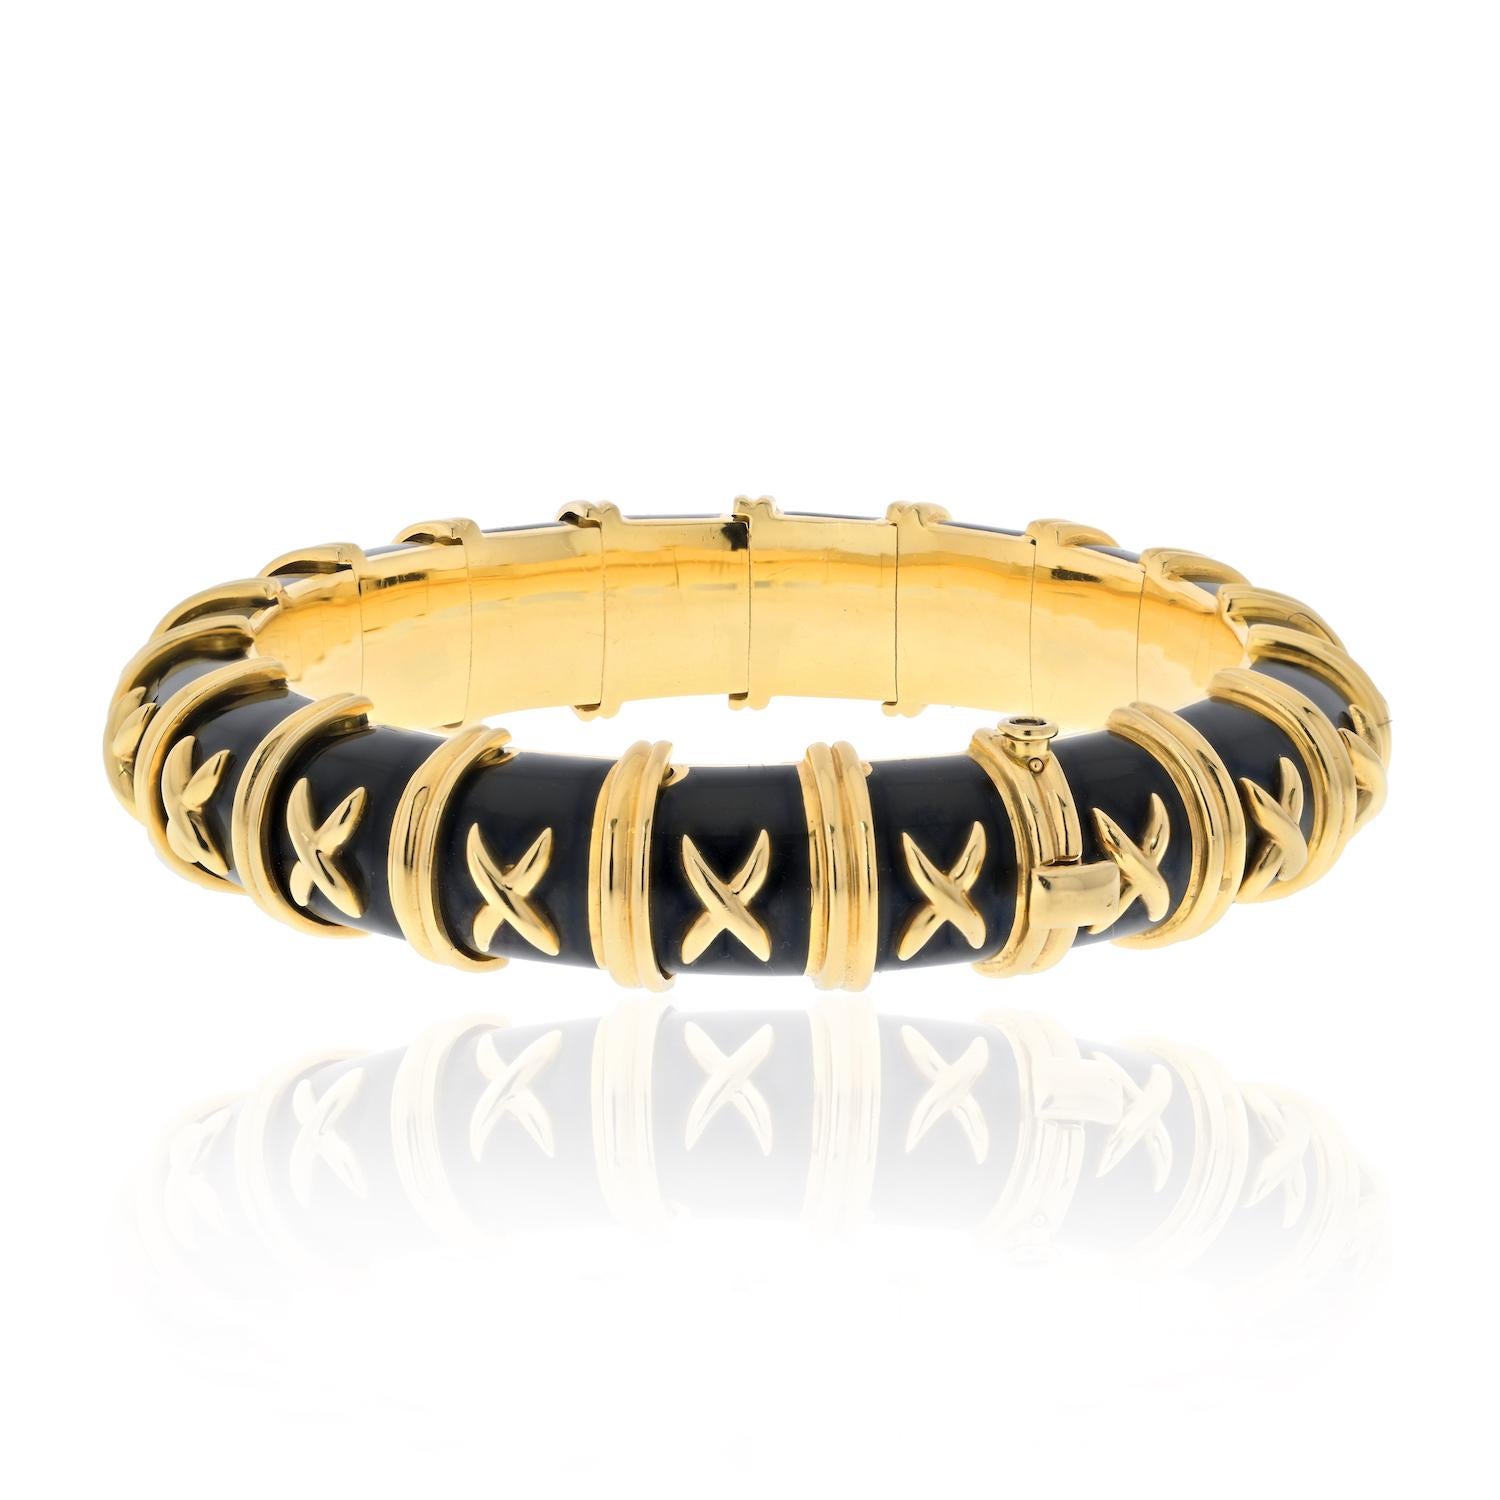 Introducing the exquisite 18K Schlumberger Croisillon Bracelet, a true testament to the iconic style and artistry of Jean Schlumberger. This captivating bracelet is crafted in 18K gold and features a mesmerizing design that exudes elegance and